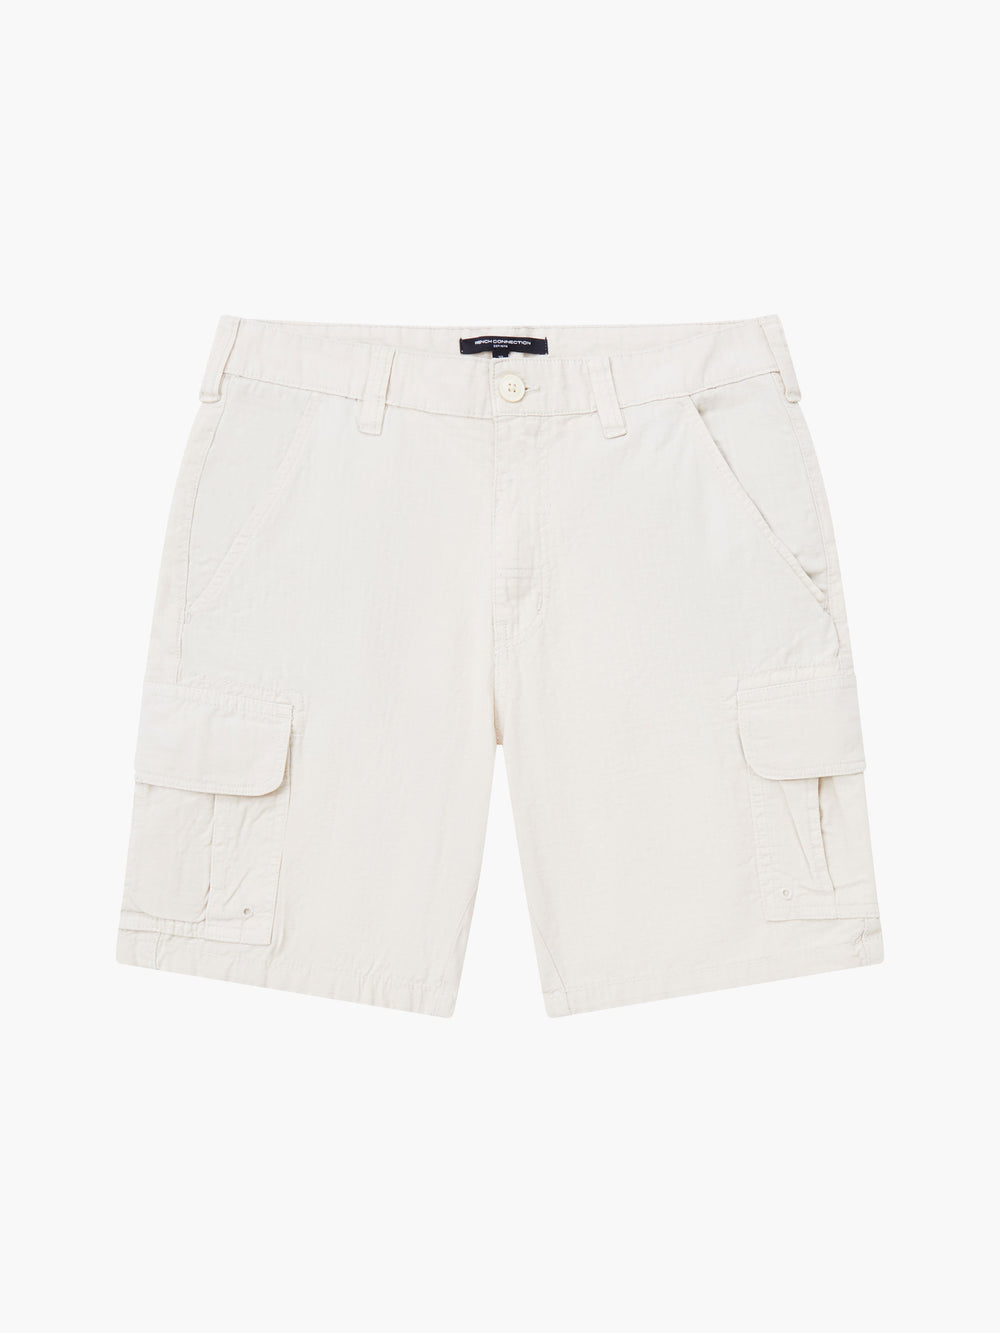 Ripstop Cargo Shorts Stone | French Connection UK